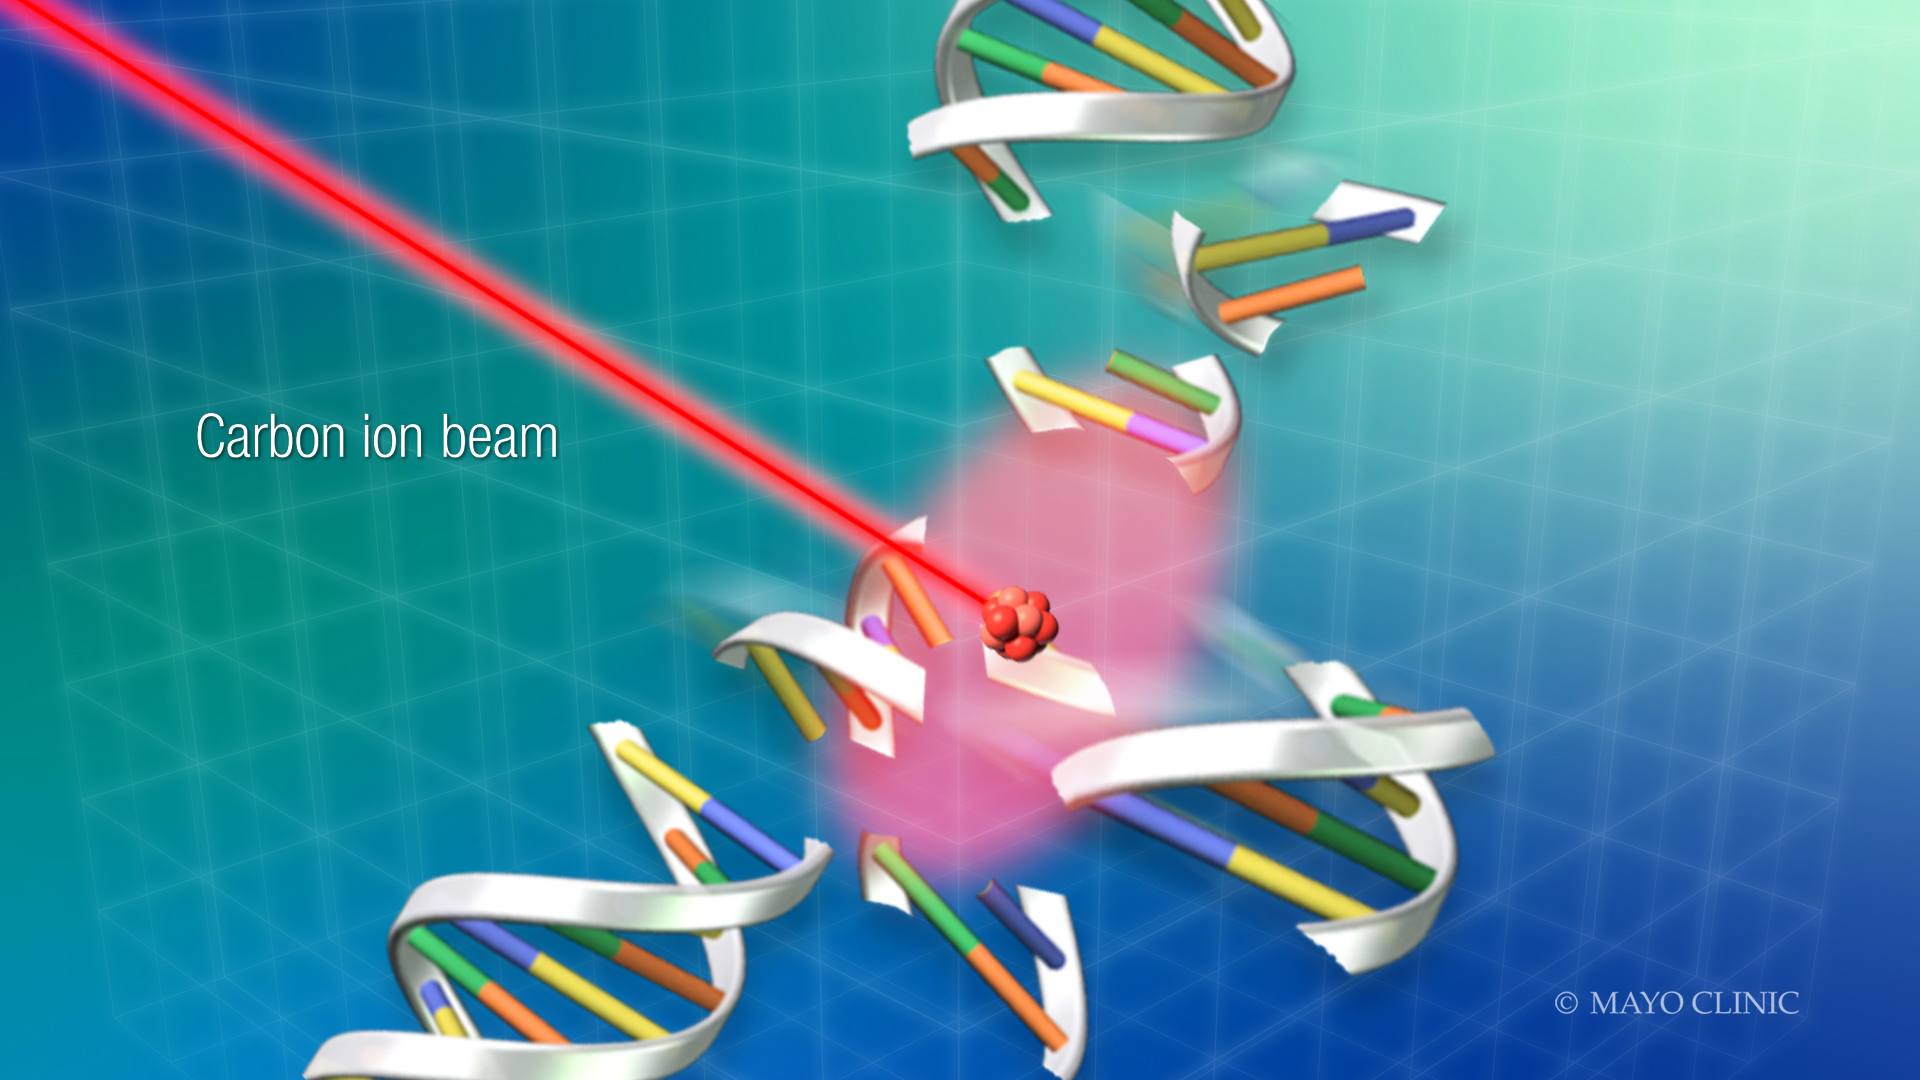 illustration of a carbon ion beam